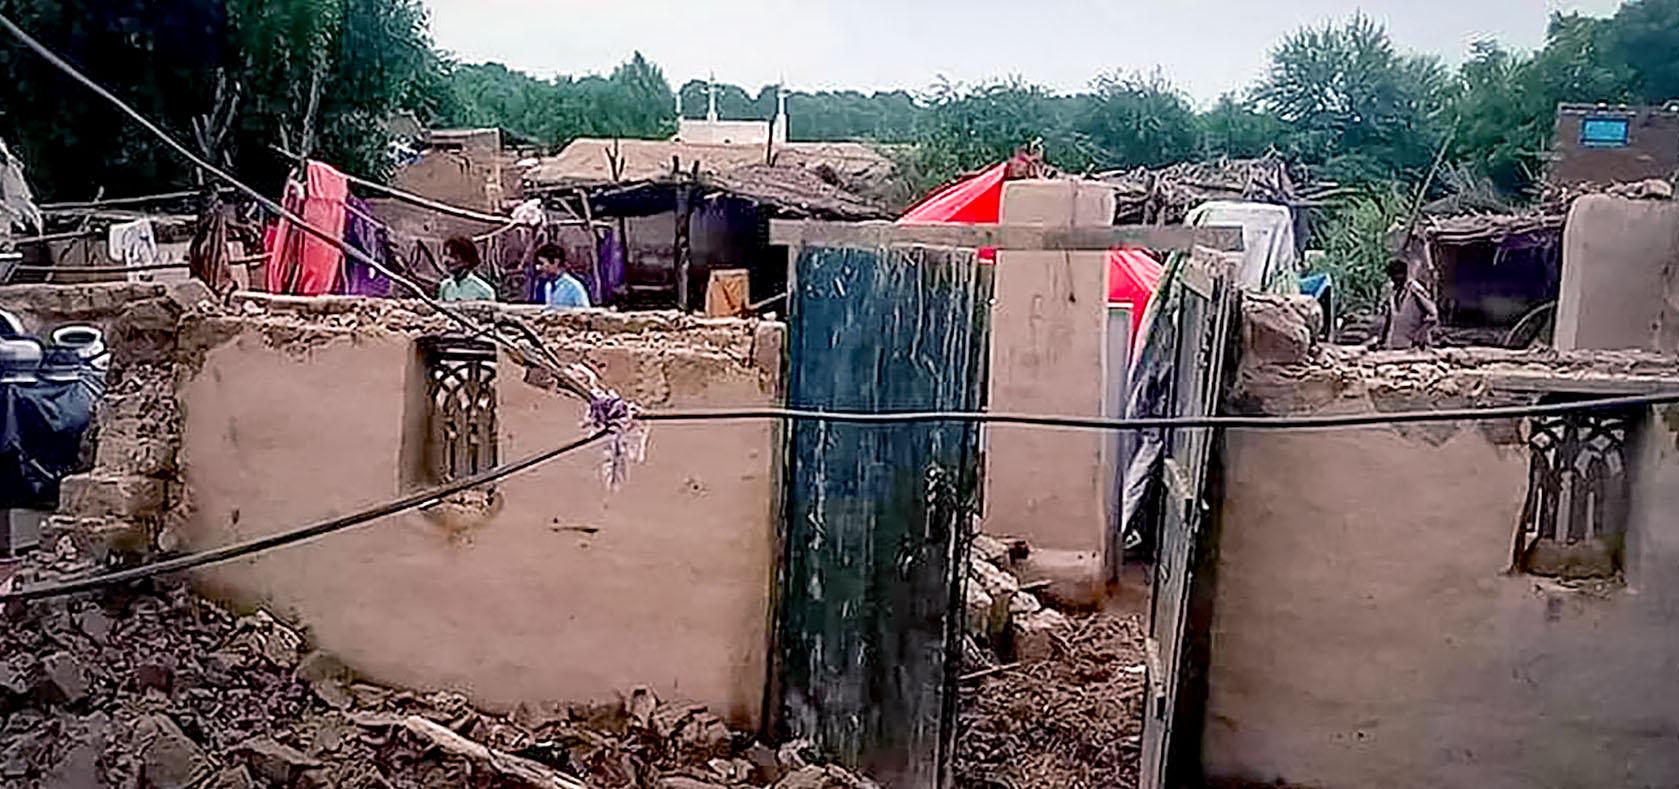 A view of a flood-damaged dwelling in Pakistan, August 2022. Photo courtesy of Rozan